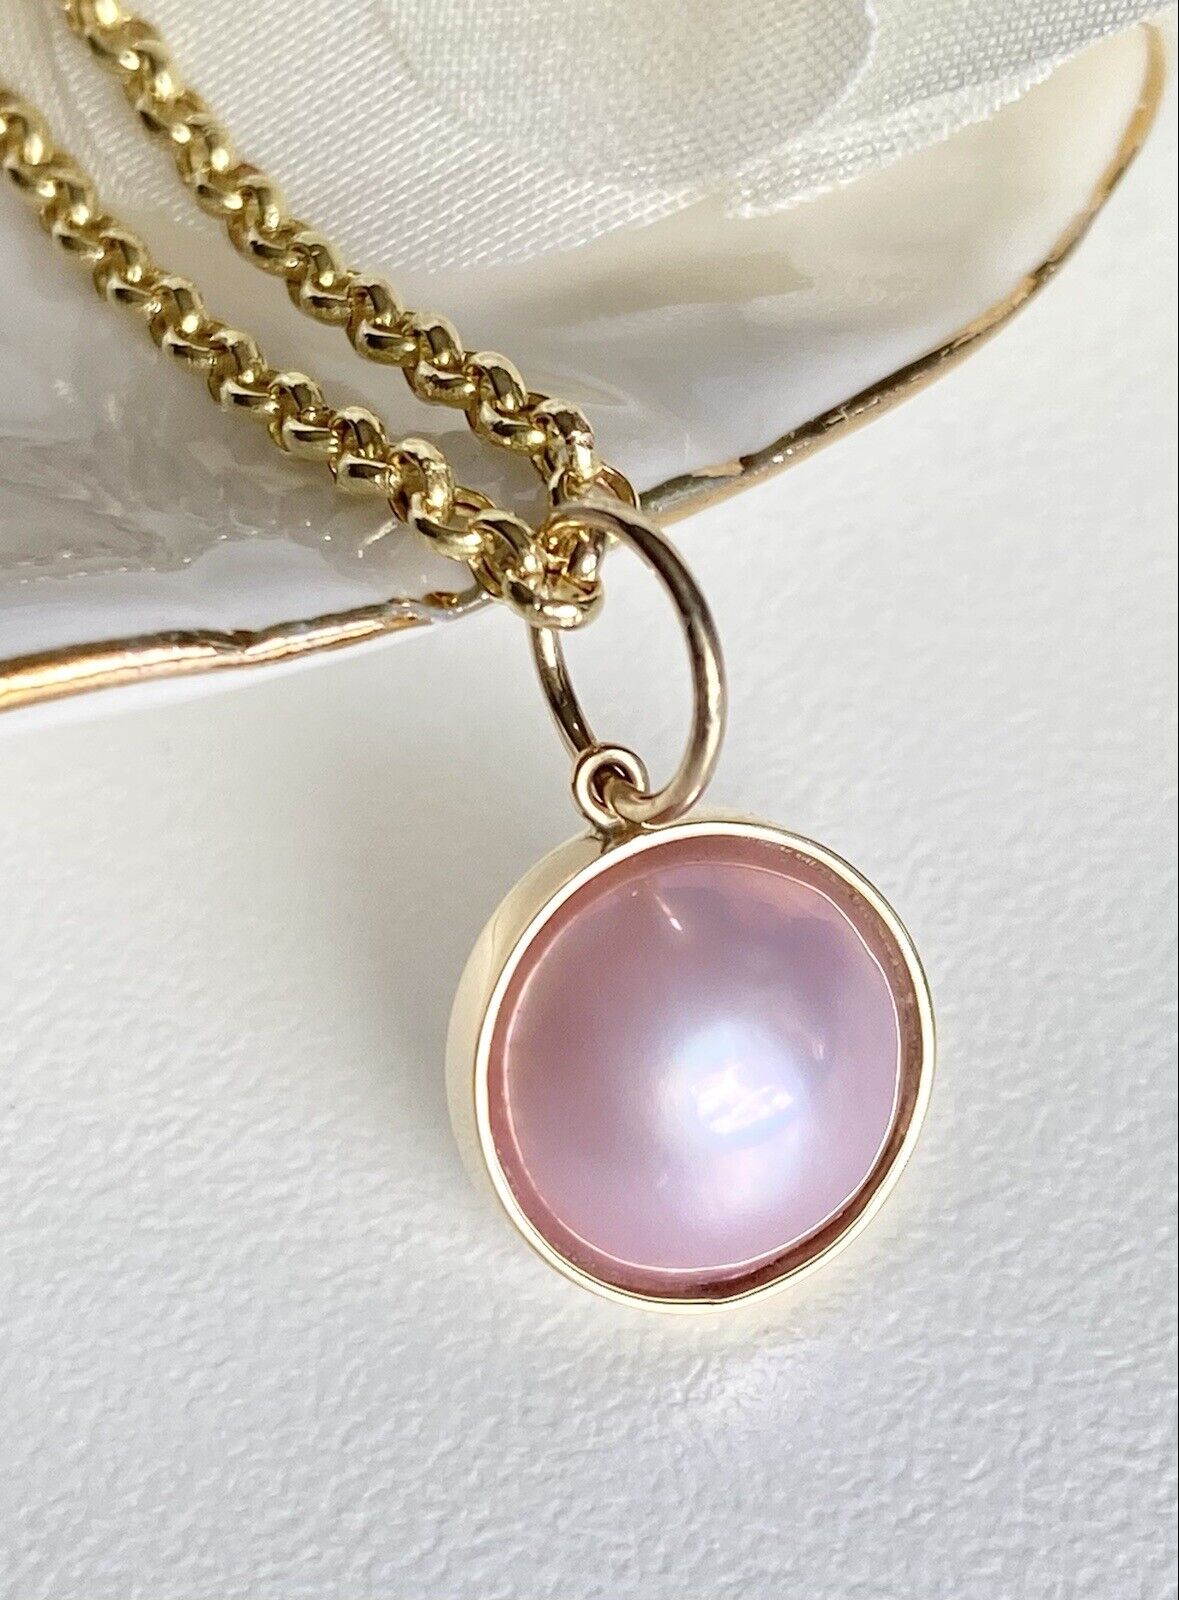 Genuine Pink Mabe Pearl (11mm) Solid 14K Yellow Gold Pendant, New